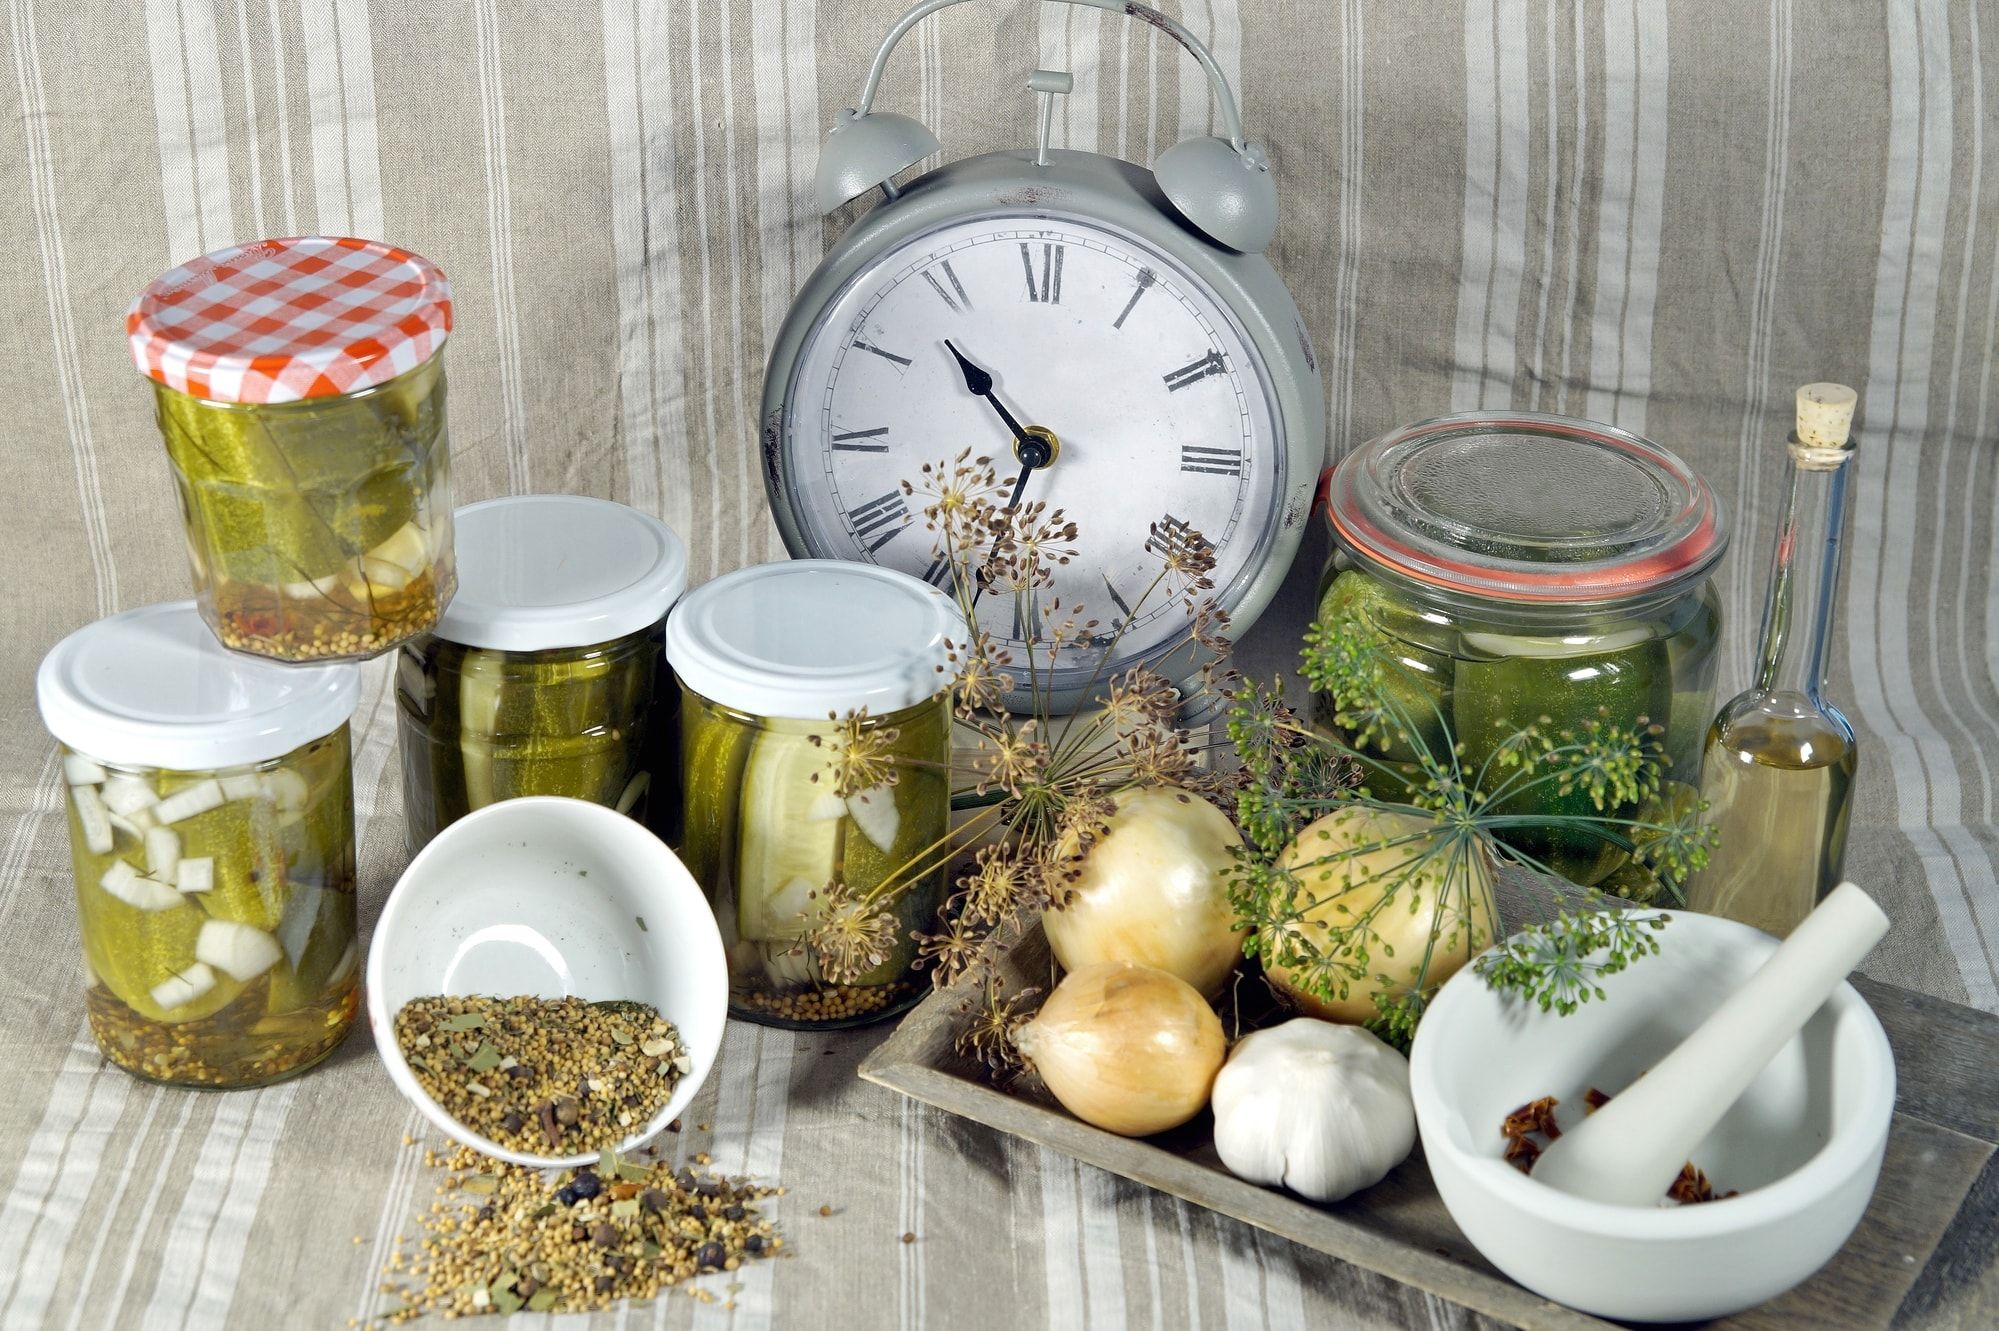 Time to pickled. to keep long time. Pickled cucumbers in glass jar with clock, herbs and dill spices, on a fabric linen background.